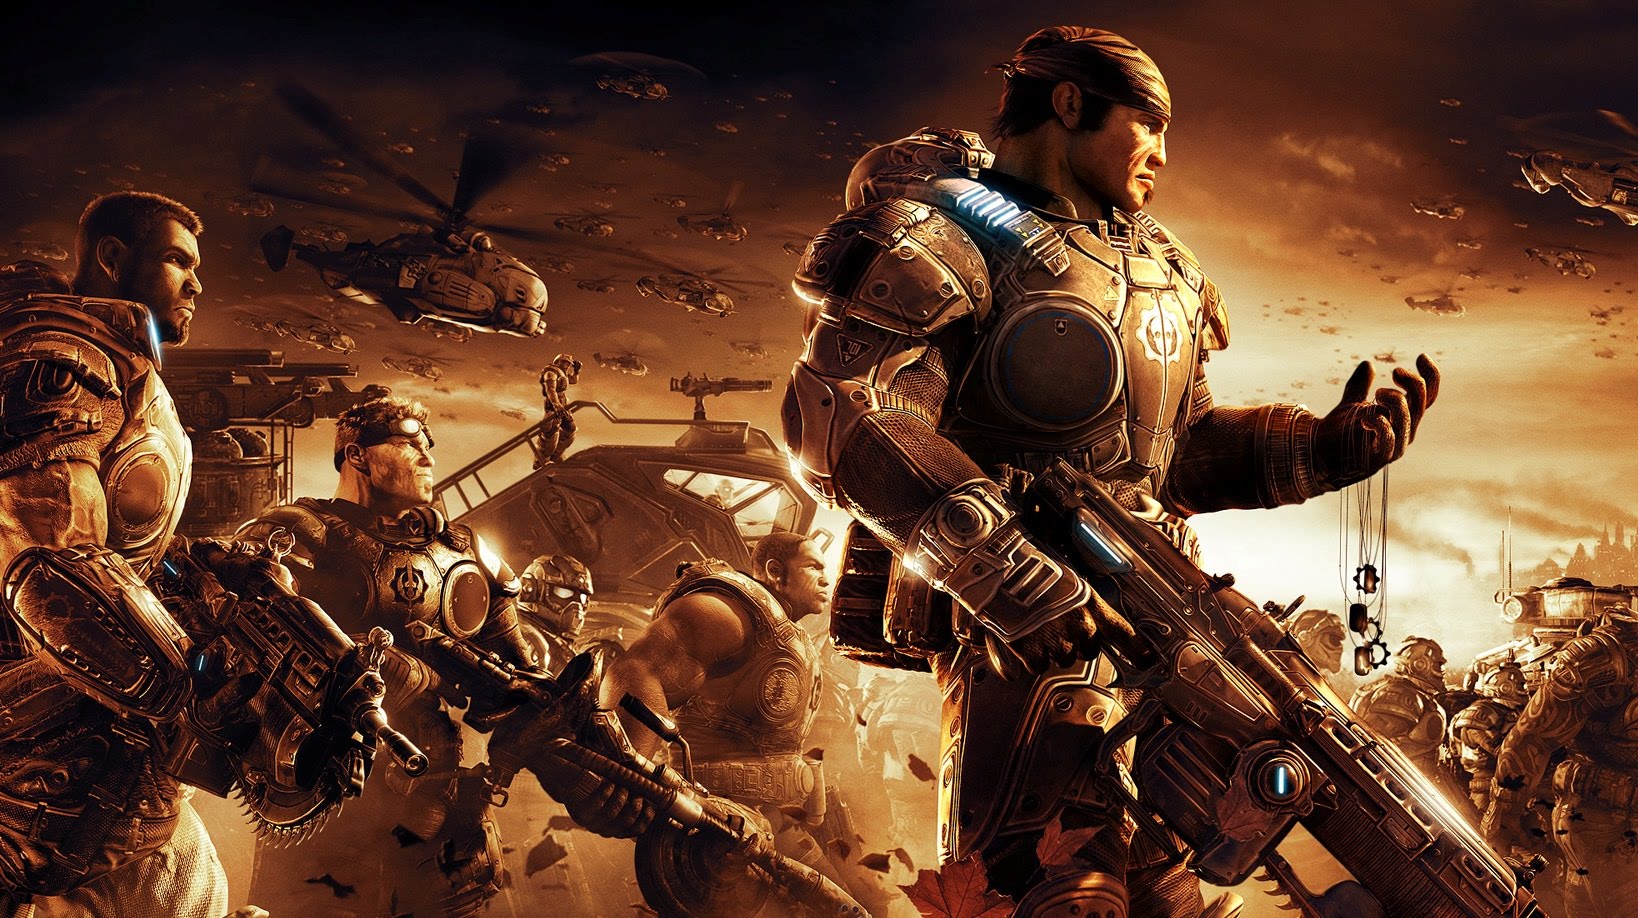 Gears Of War 2 Backgrounds, Compatible - PC, Mobile, Gadgets| 1638x918 px